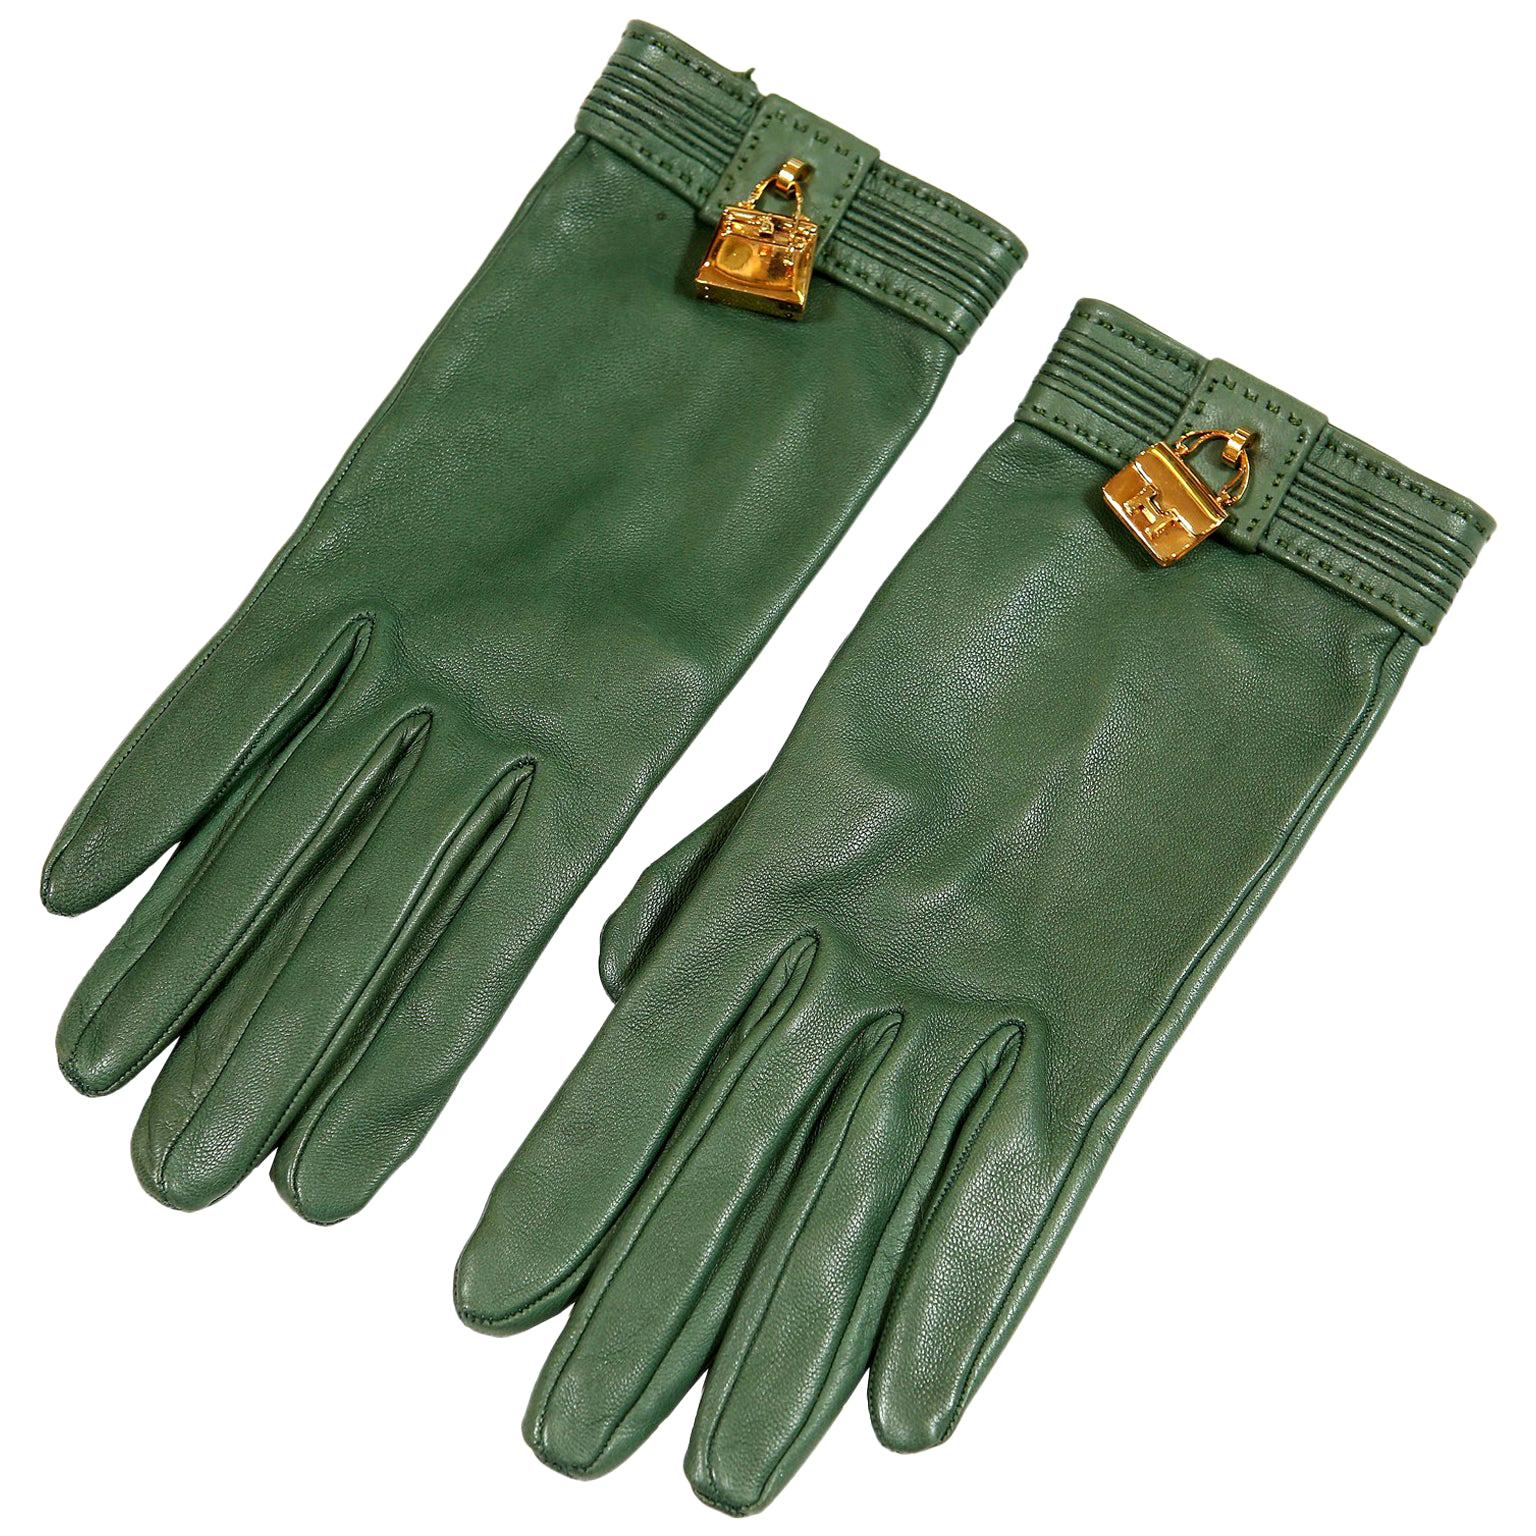 Hermès Green Leather Gloves with Bag Charms size 6.5